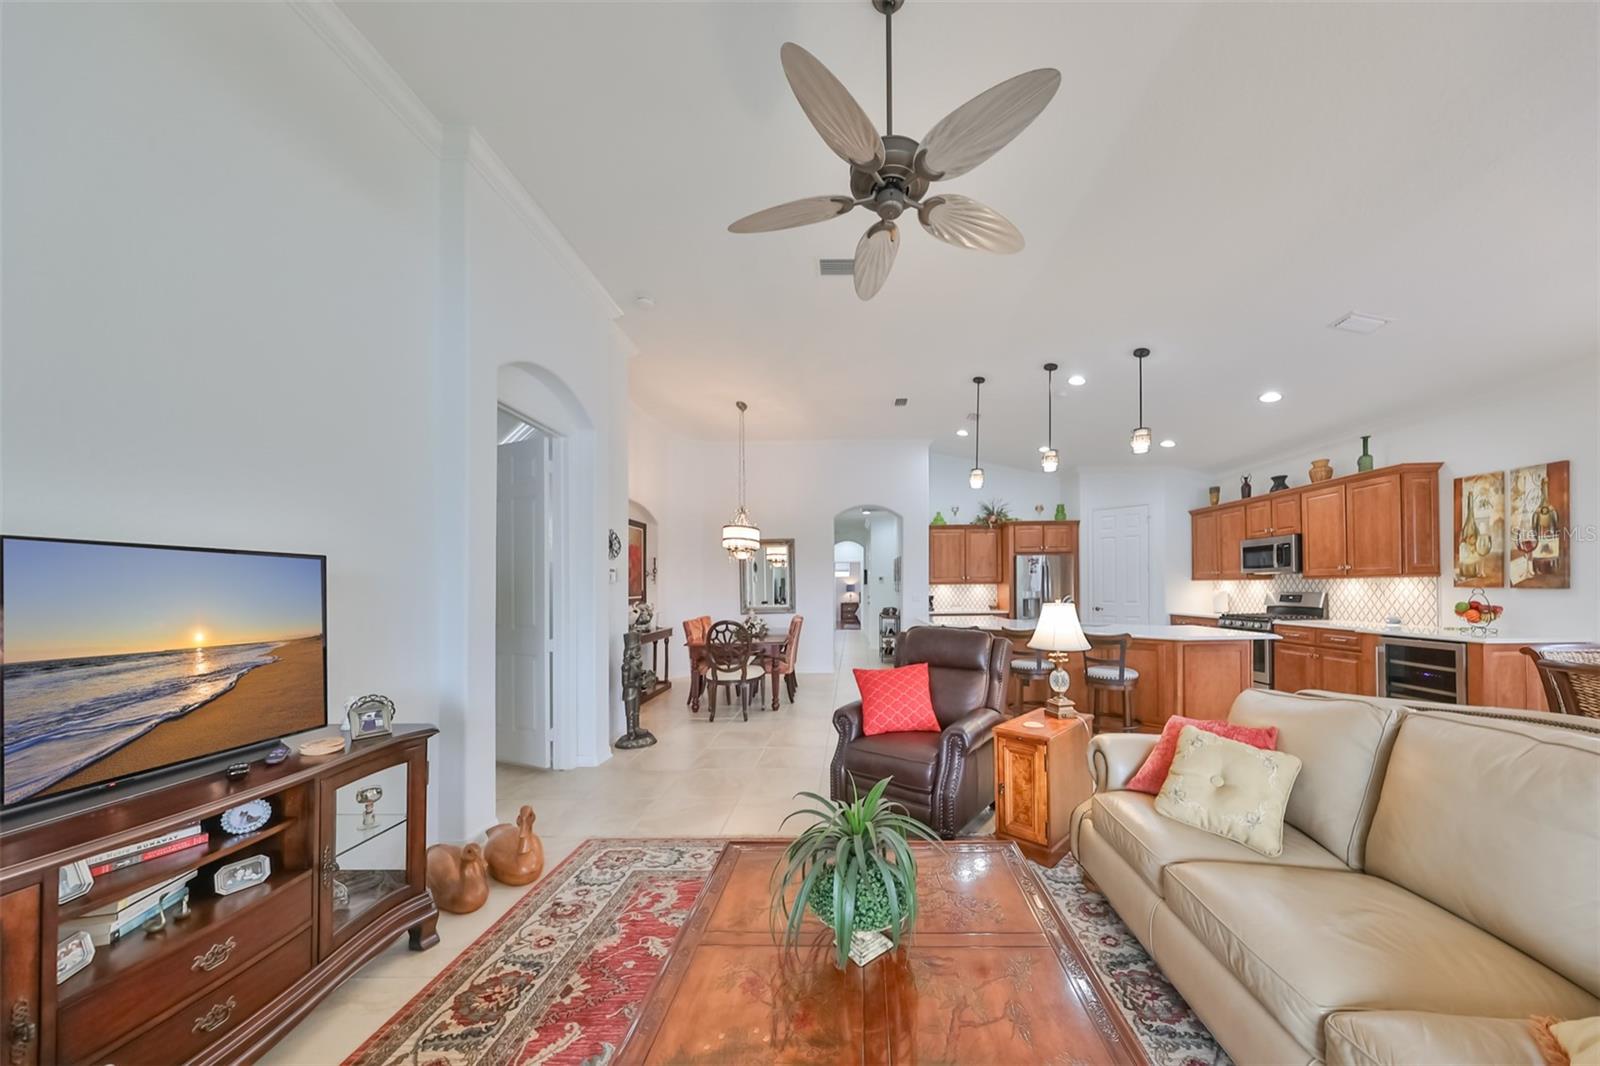 Living area has 12' ceilings, custom ceiling fan and lots of bright natural sunshine, that is open to the dining and kitchen areas.